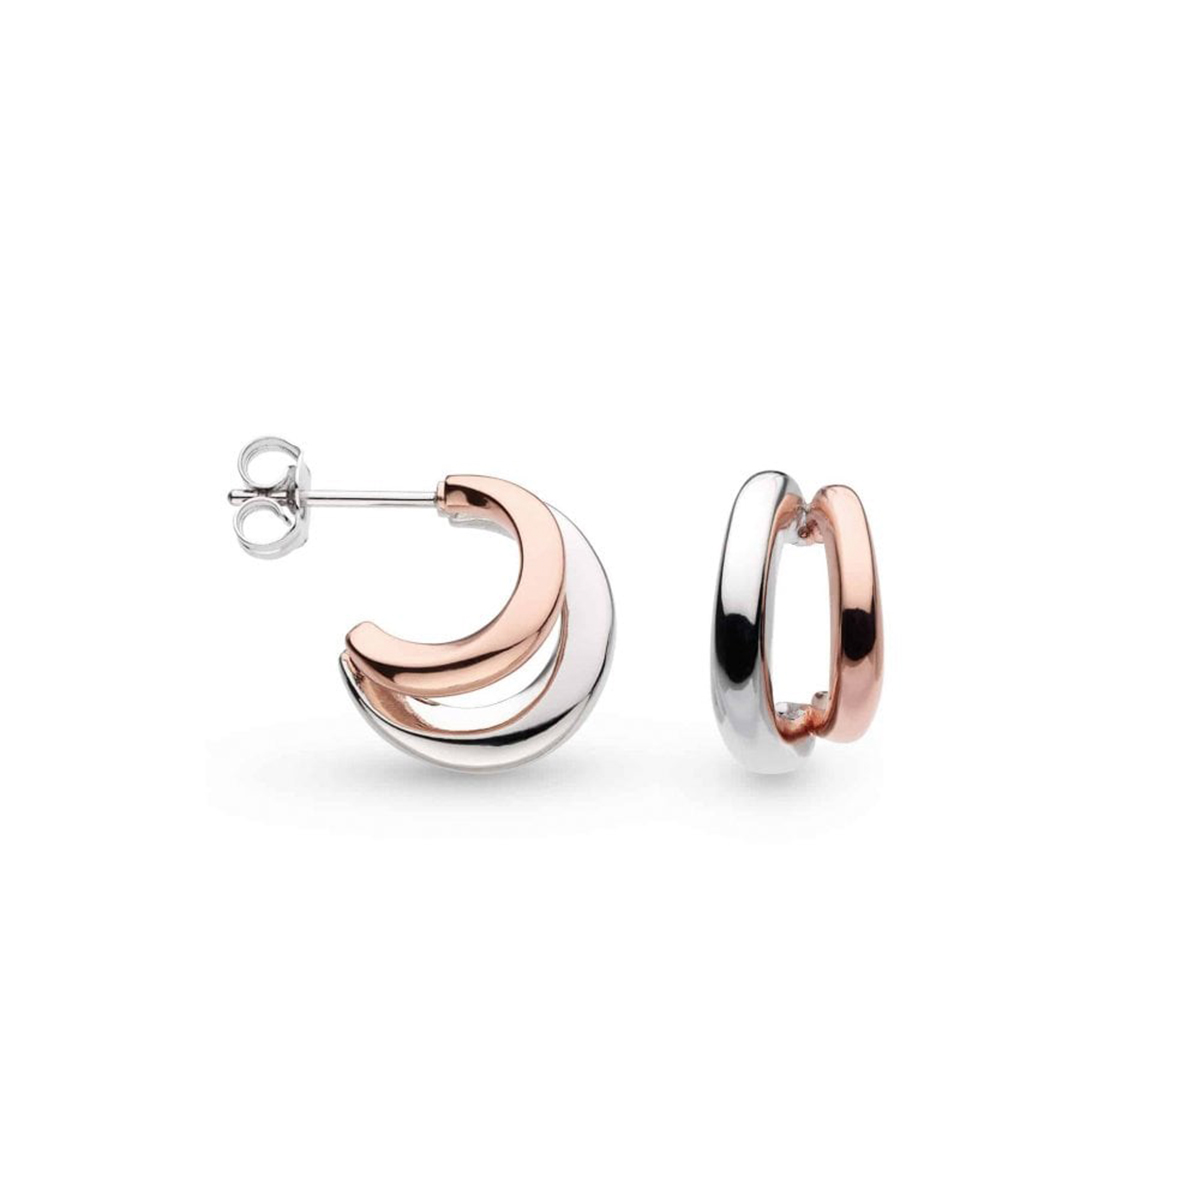 Sterling Silver and Rose Plated Bevel Cirque Hoop Earrings